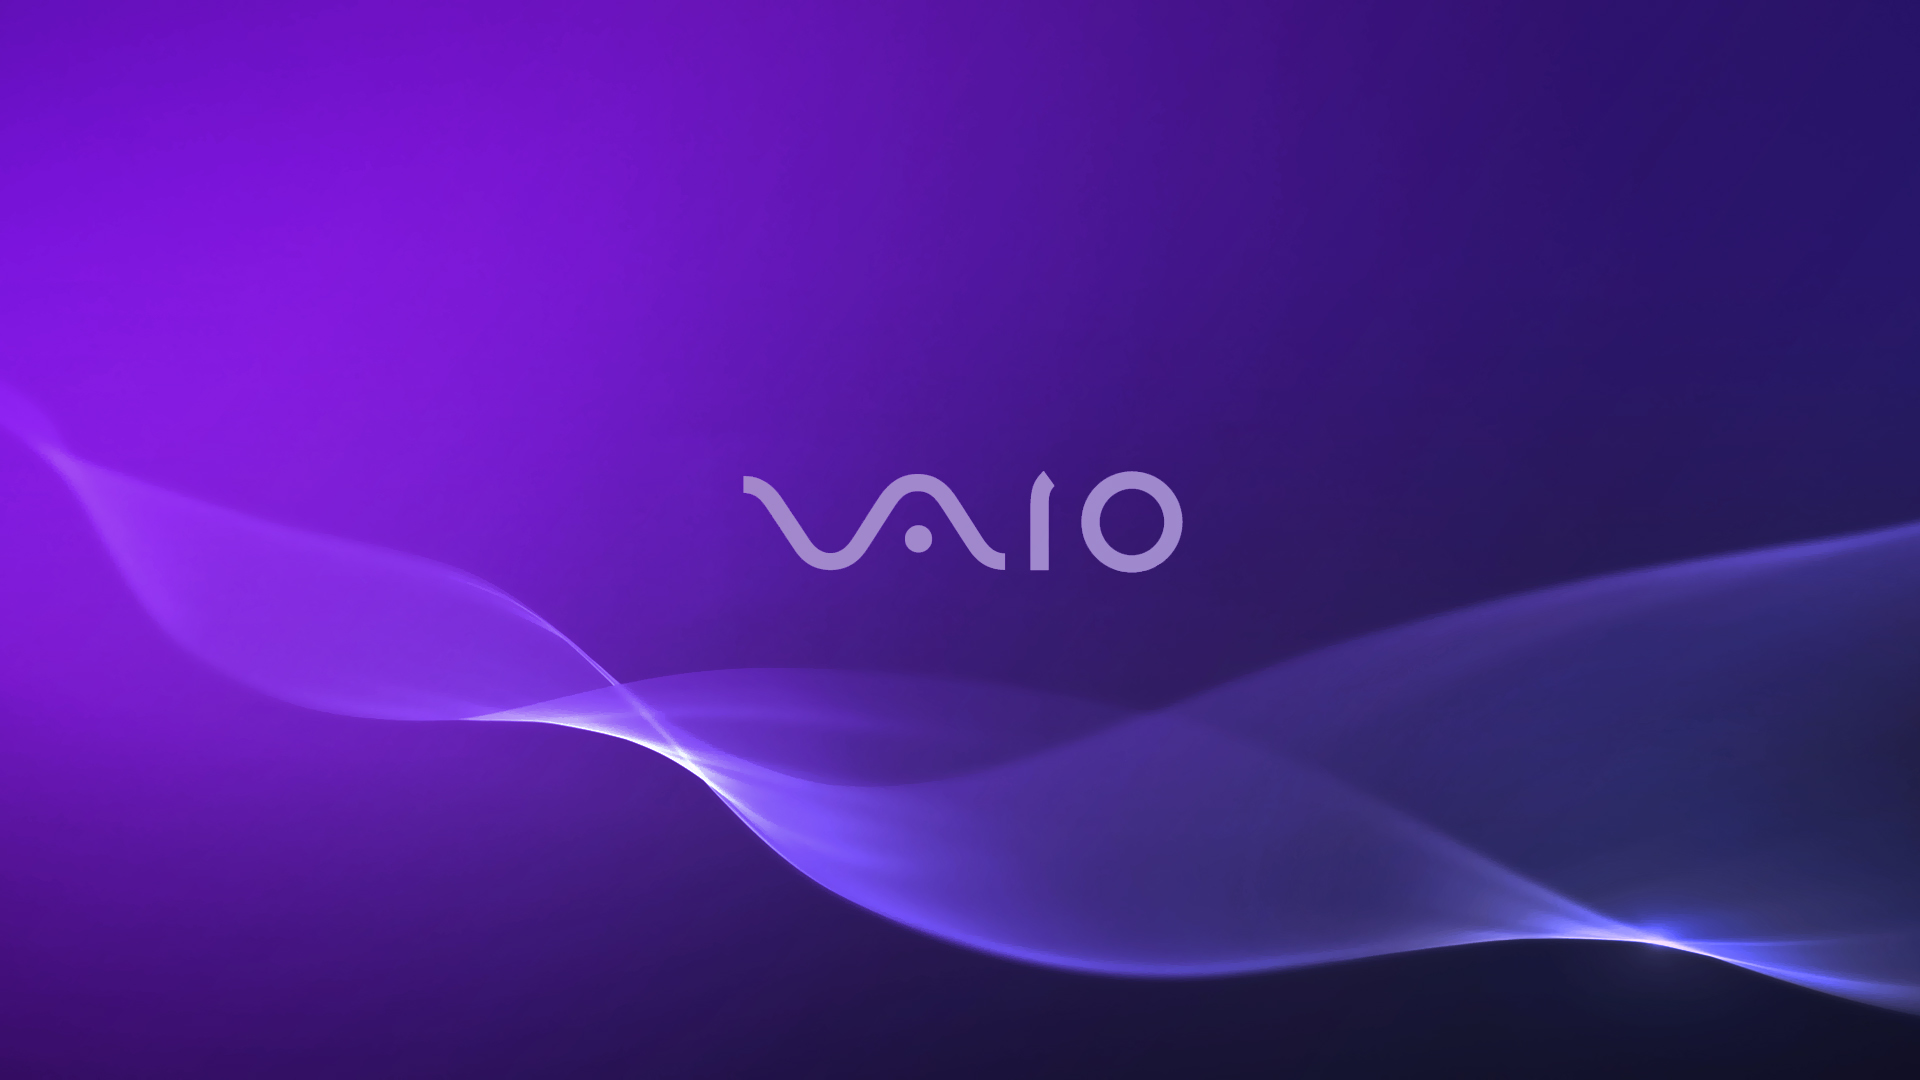 Pin Vaio Fan Art HD And Top Widescreen From Wallpaper With On